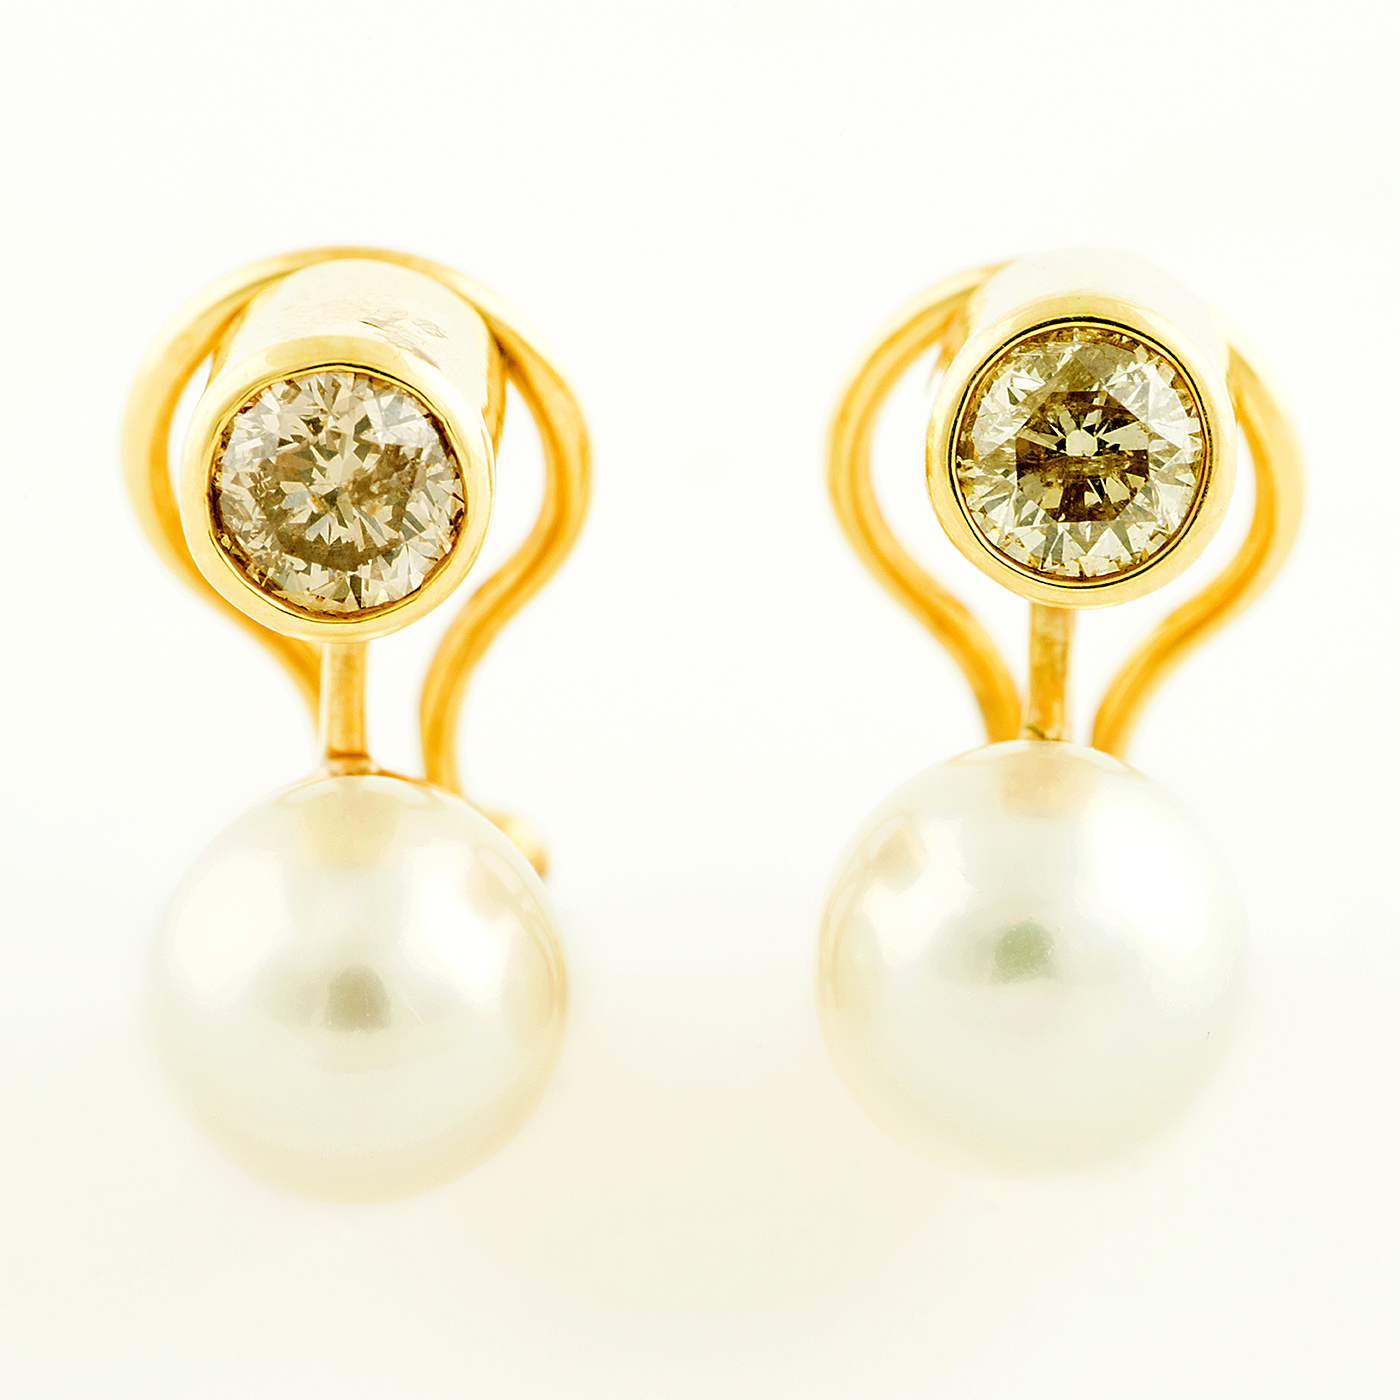 Gold earrings with 1 ct diamonds and 10 mm saltwater pearls